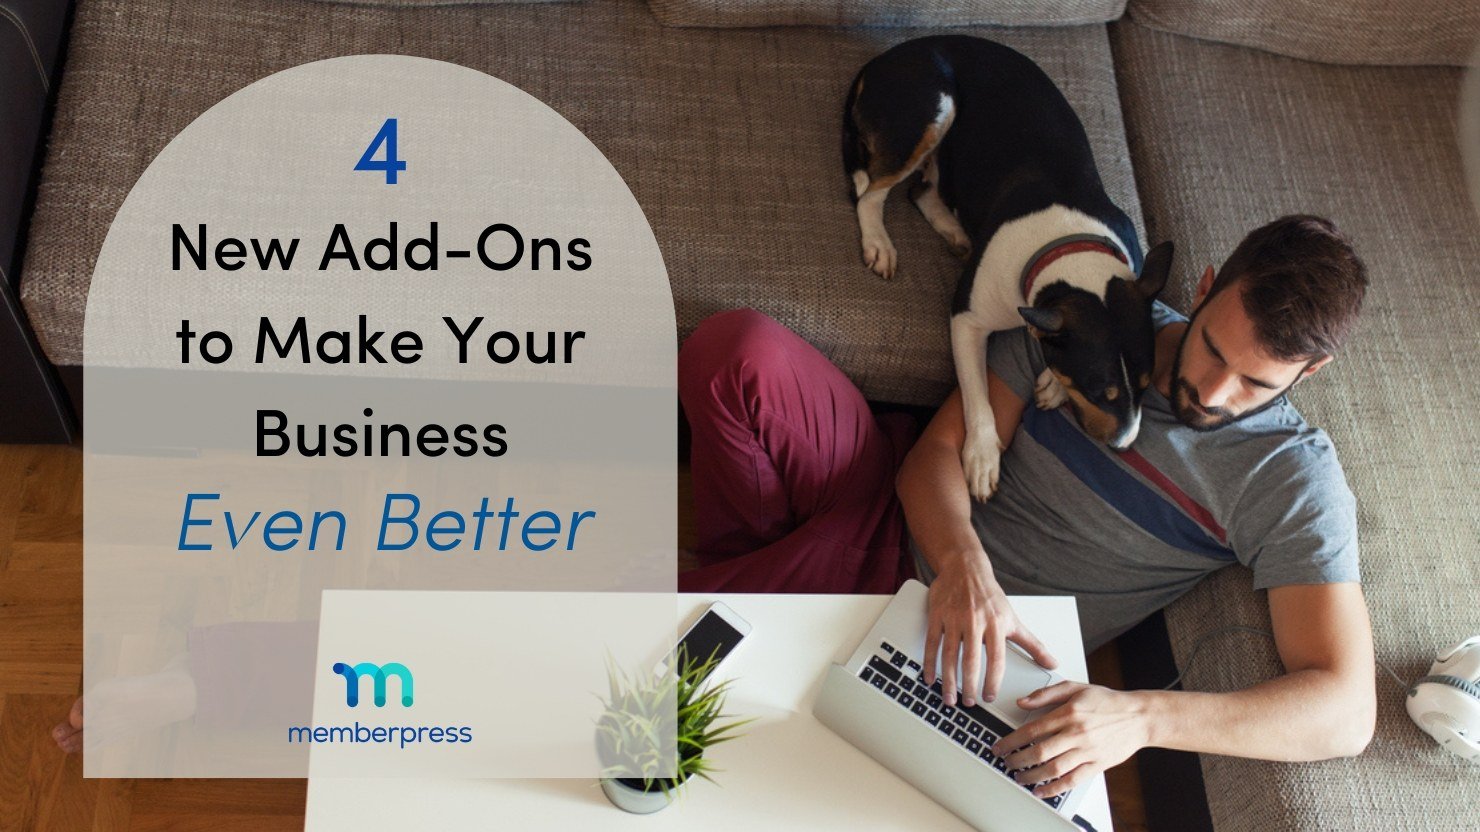 4 new add-ons to make your business even better